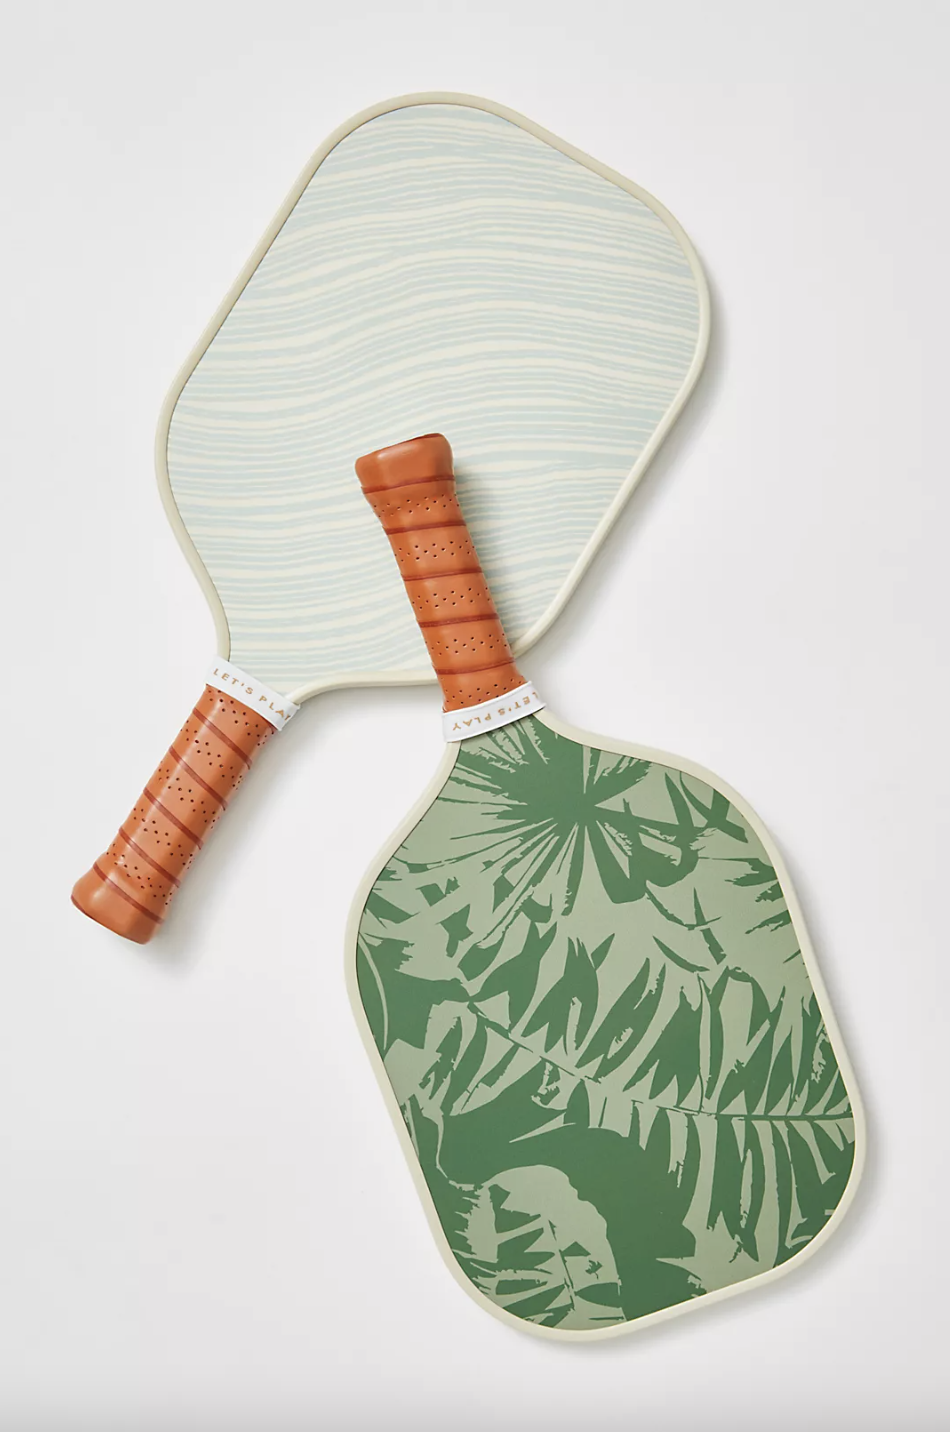 a pair of the chic pickleball paddles arranged aesthetically on a simple background